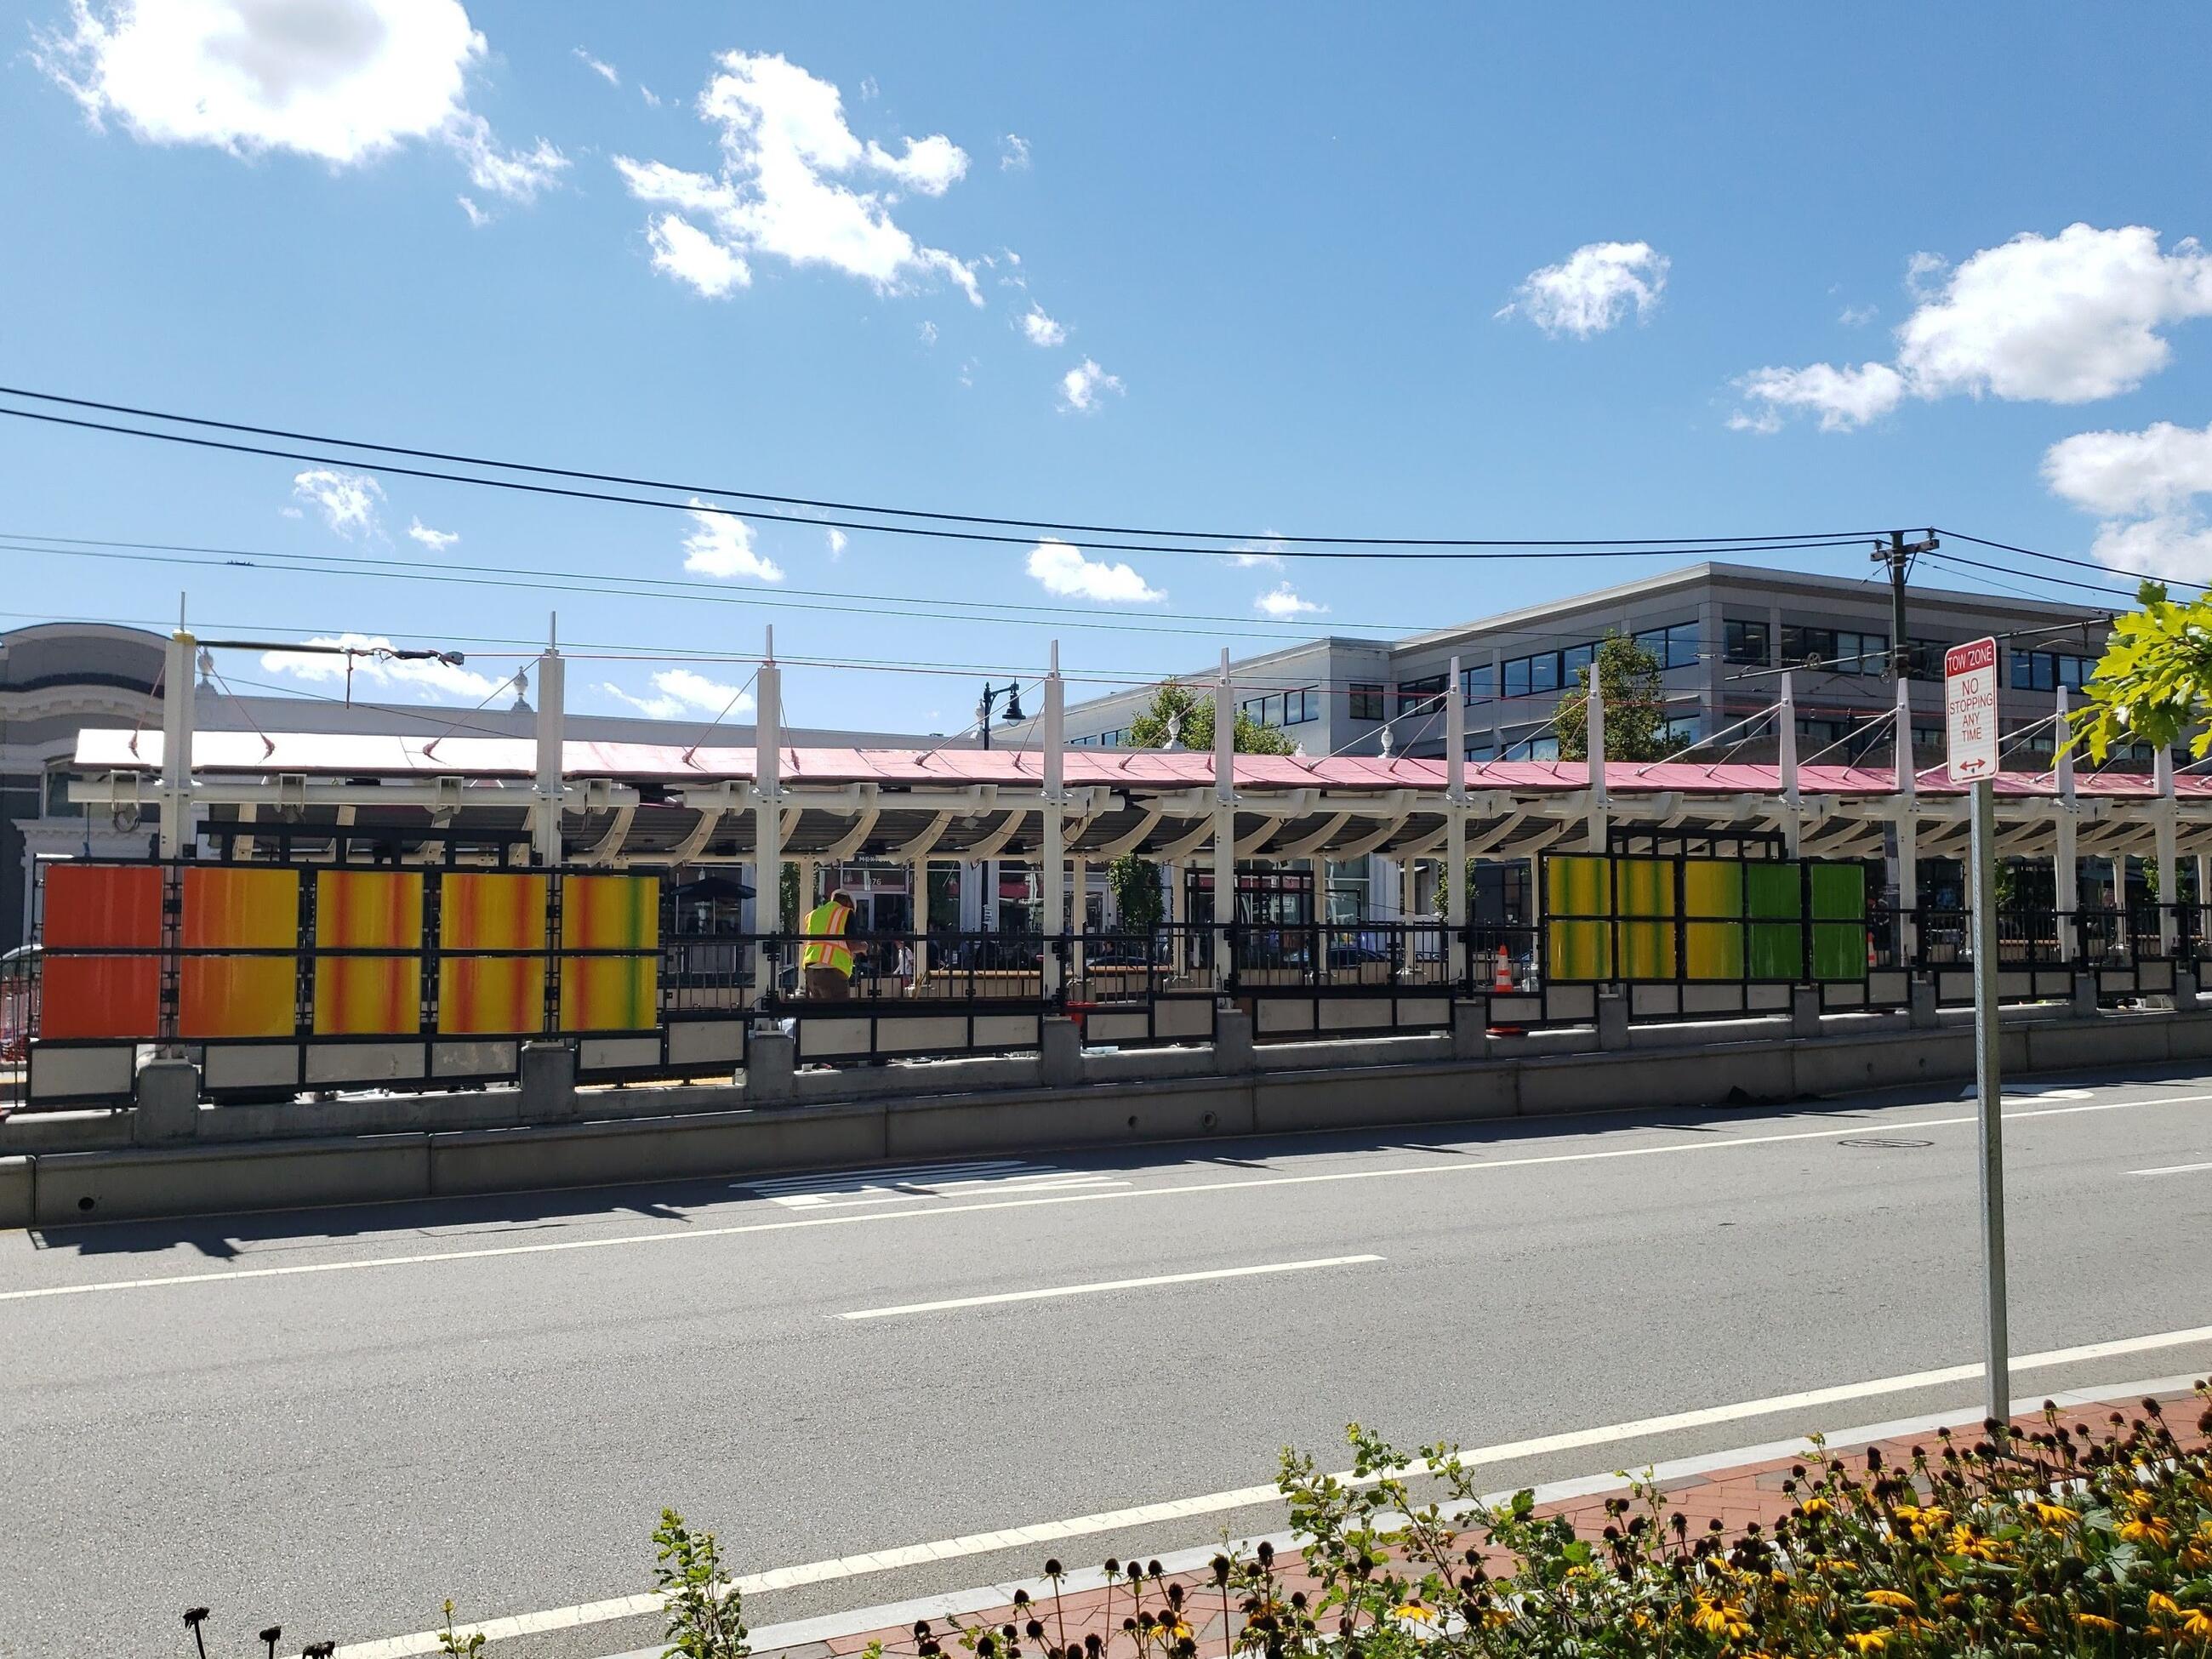 New Architectural Panels at Amory Street Station